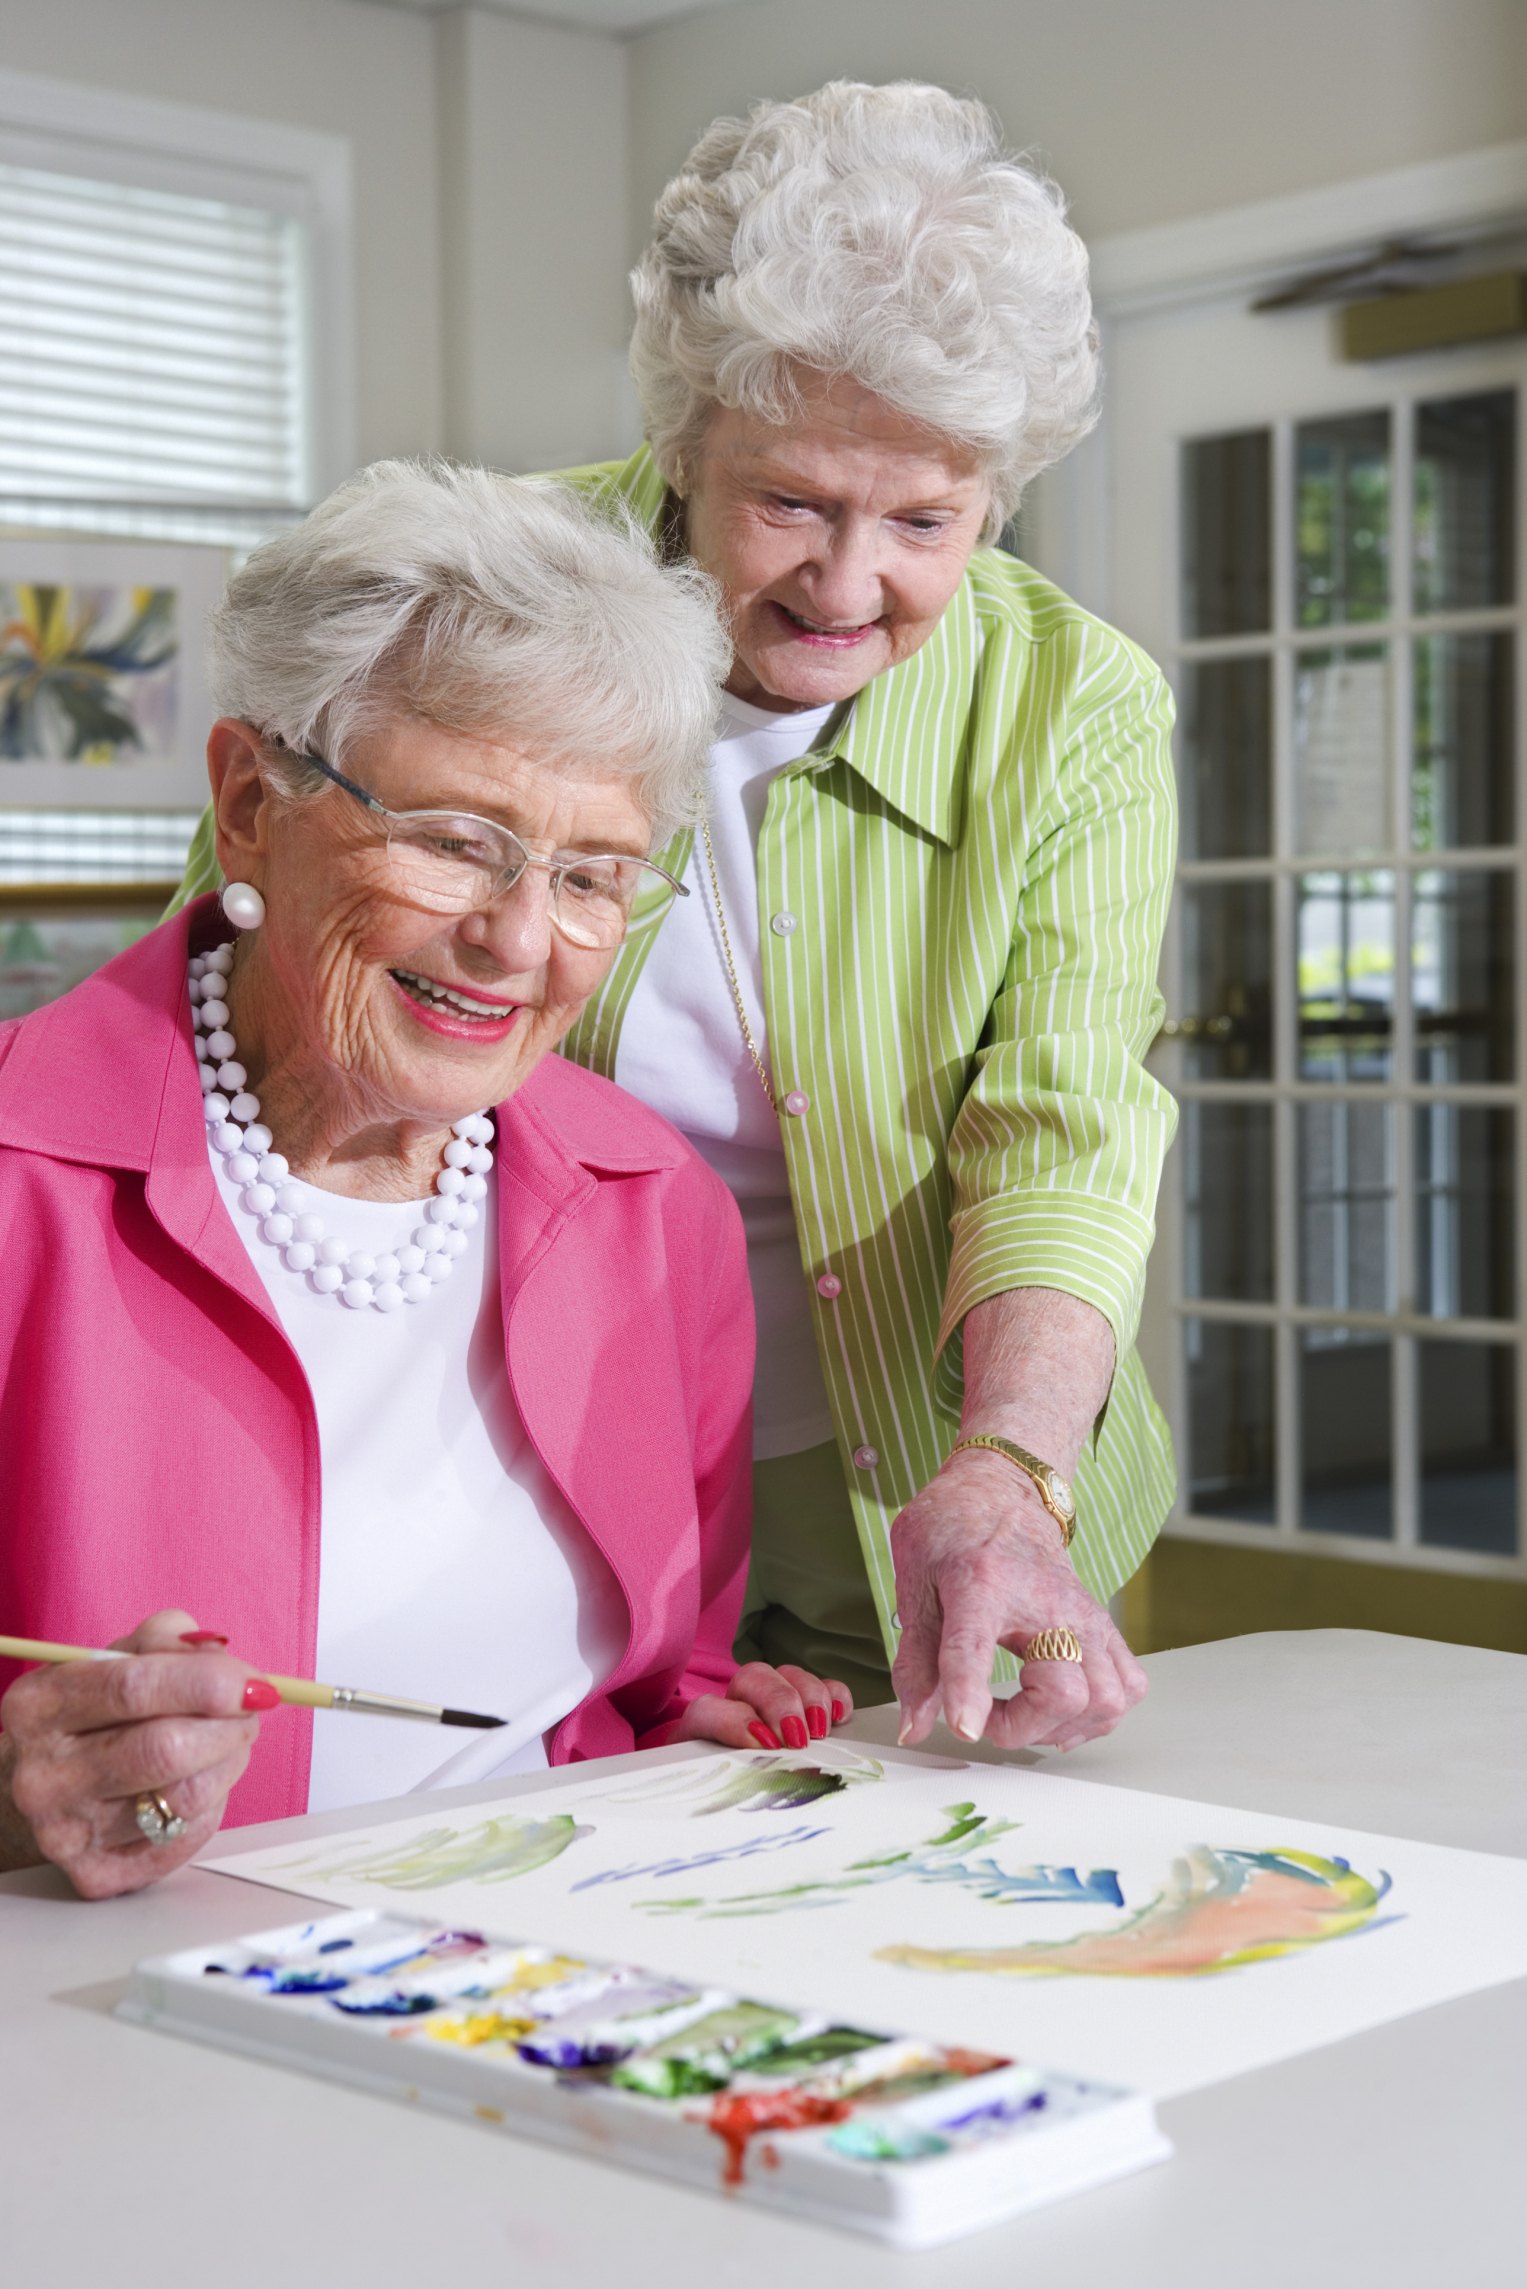 How to Find Good Arts and Crafts Ideas for Seniors | eHow